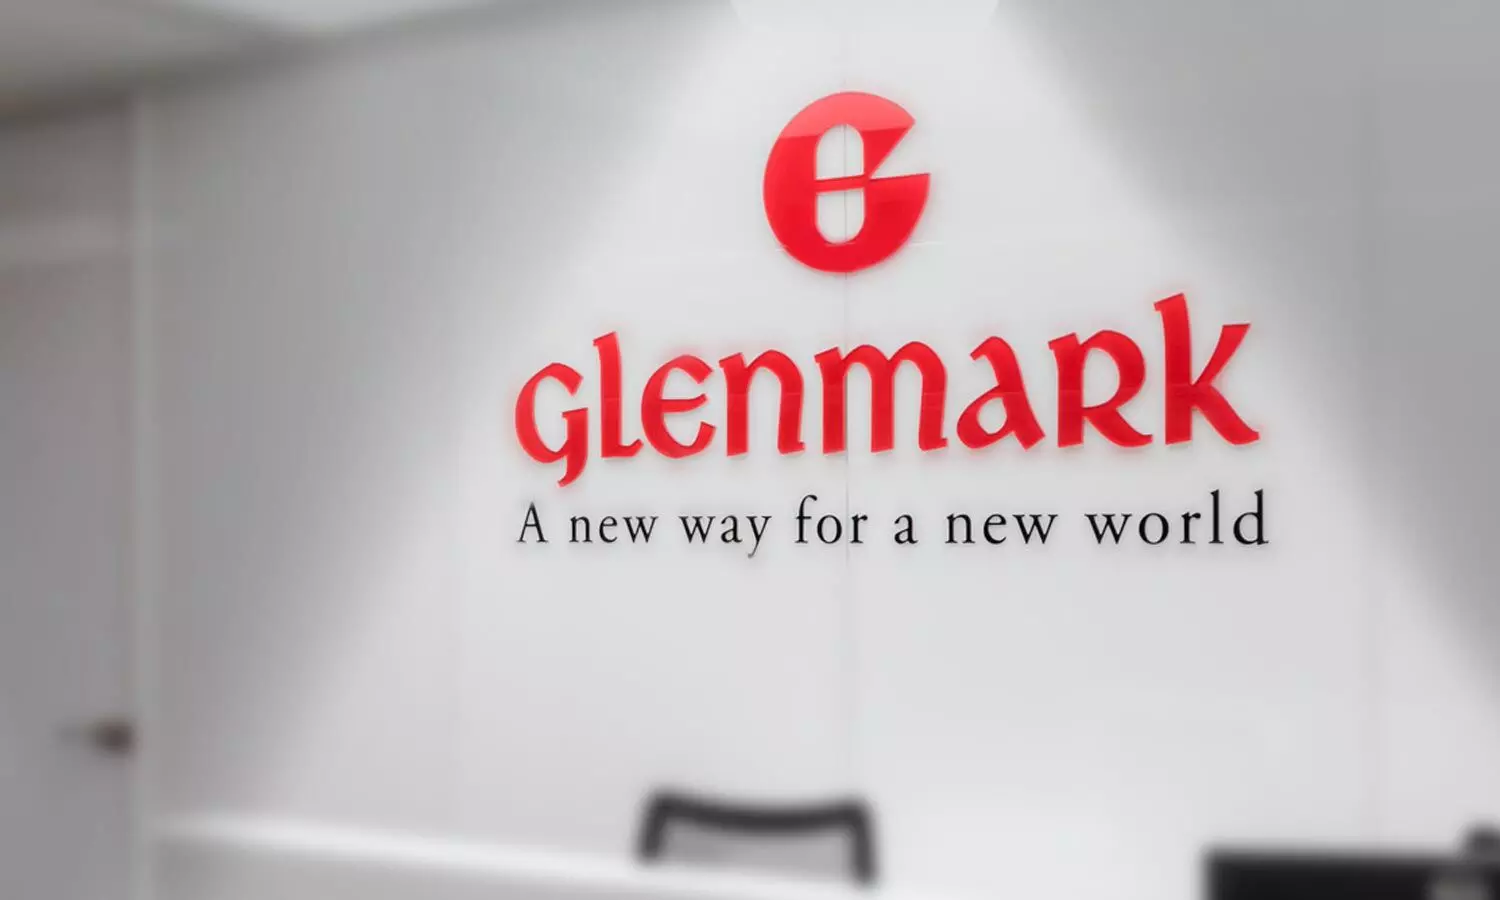 Glenmark gets listed in Dow Jones Sustainability Index